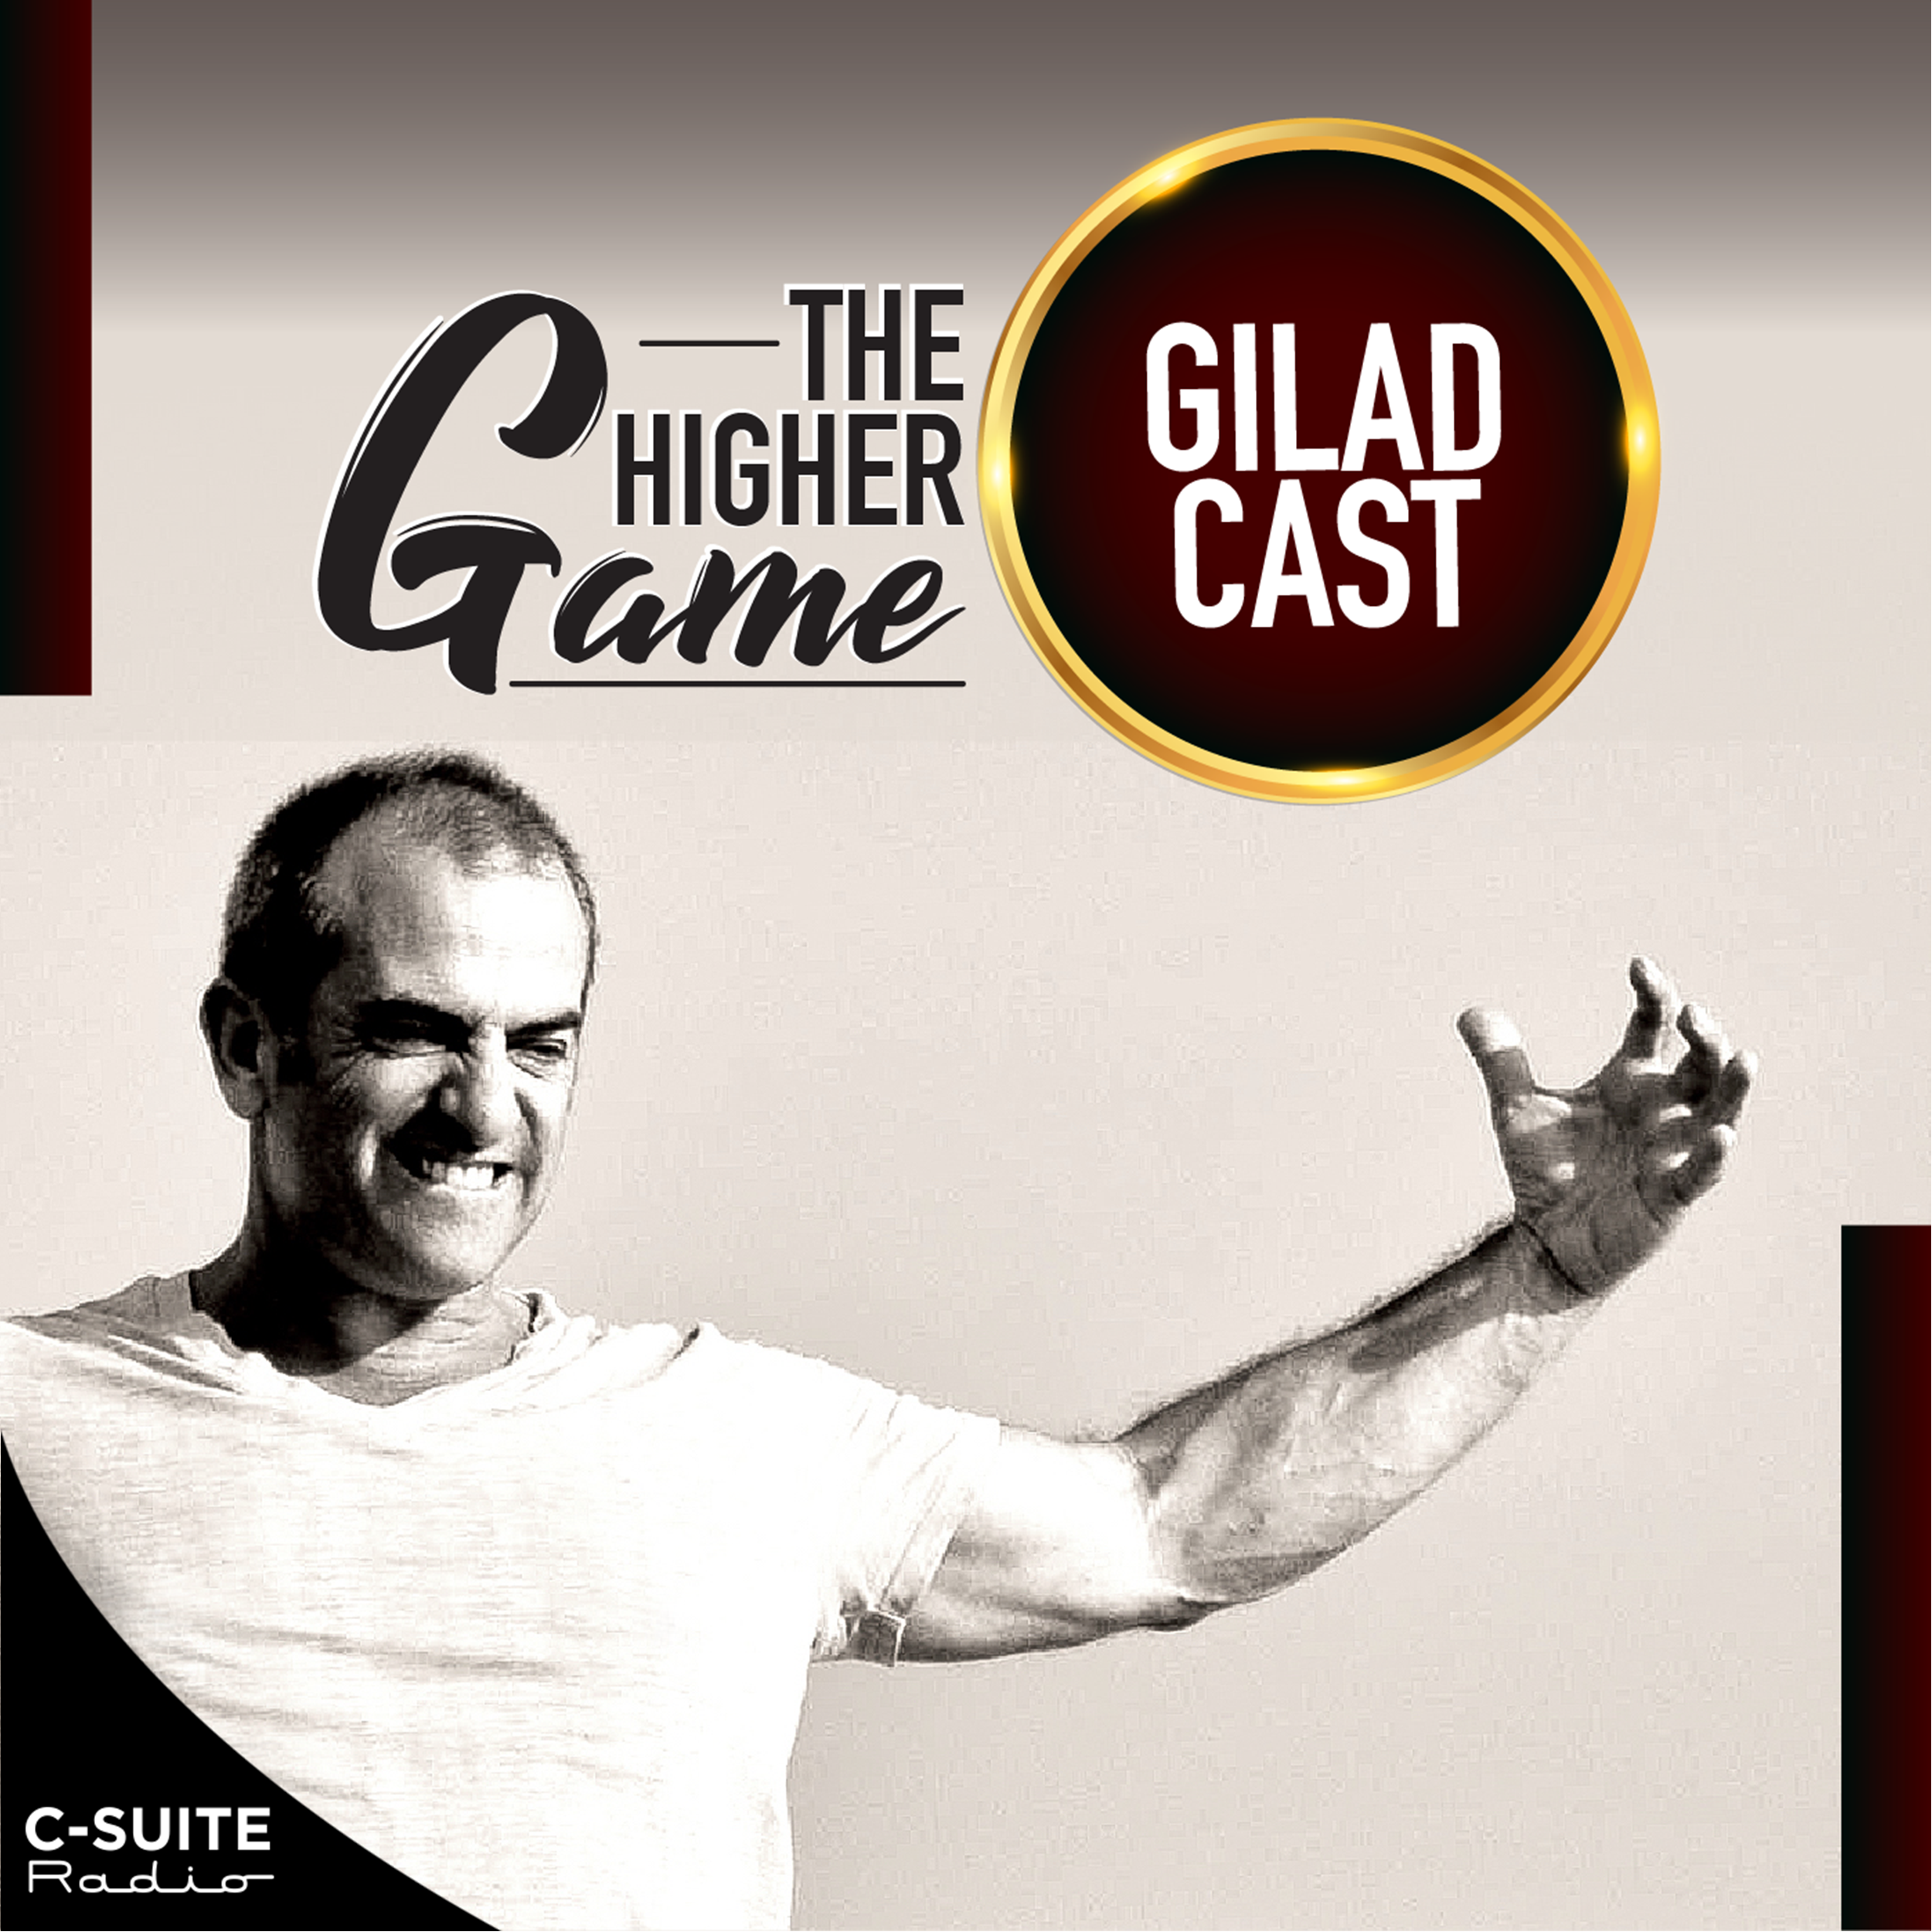 “The Higher Game”: The Bold Life GiladCast